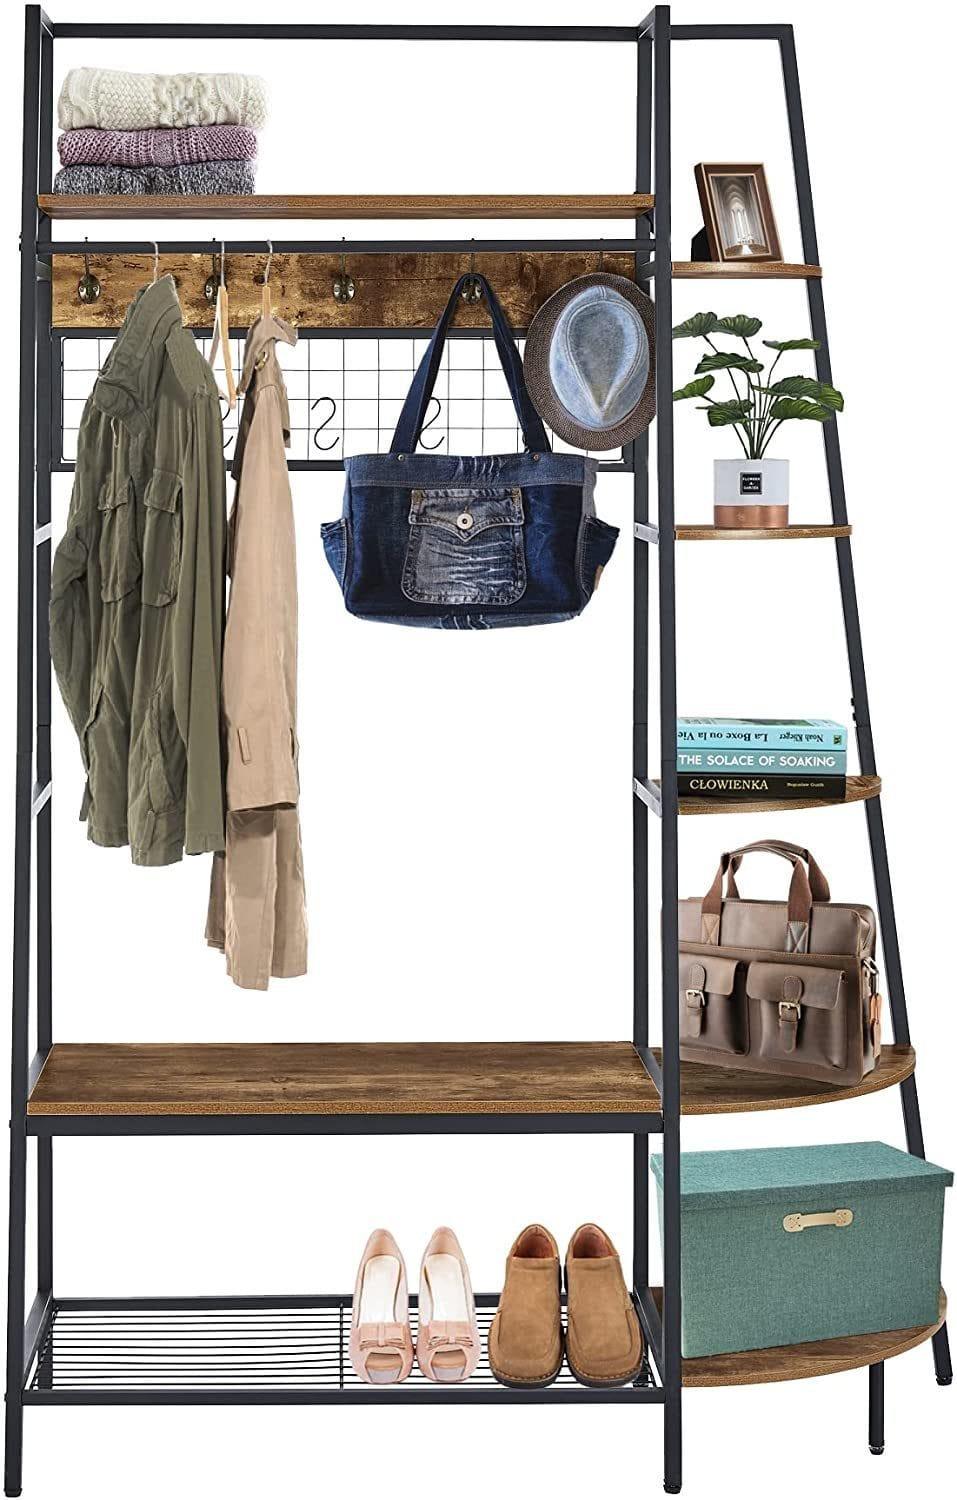 Shop Entryway Coat Rack/ Hall Tree with Bookshelves, Multiple Hooks, and Bench Seat Mademoiselle Home Decor